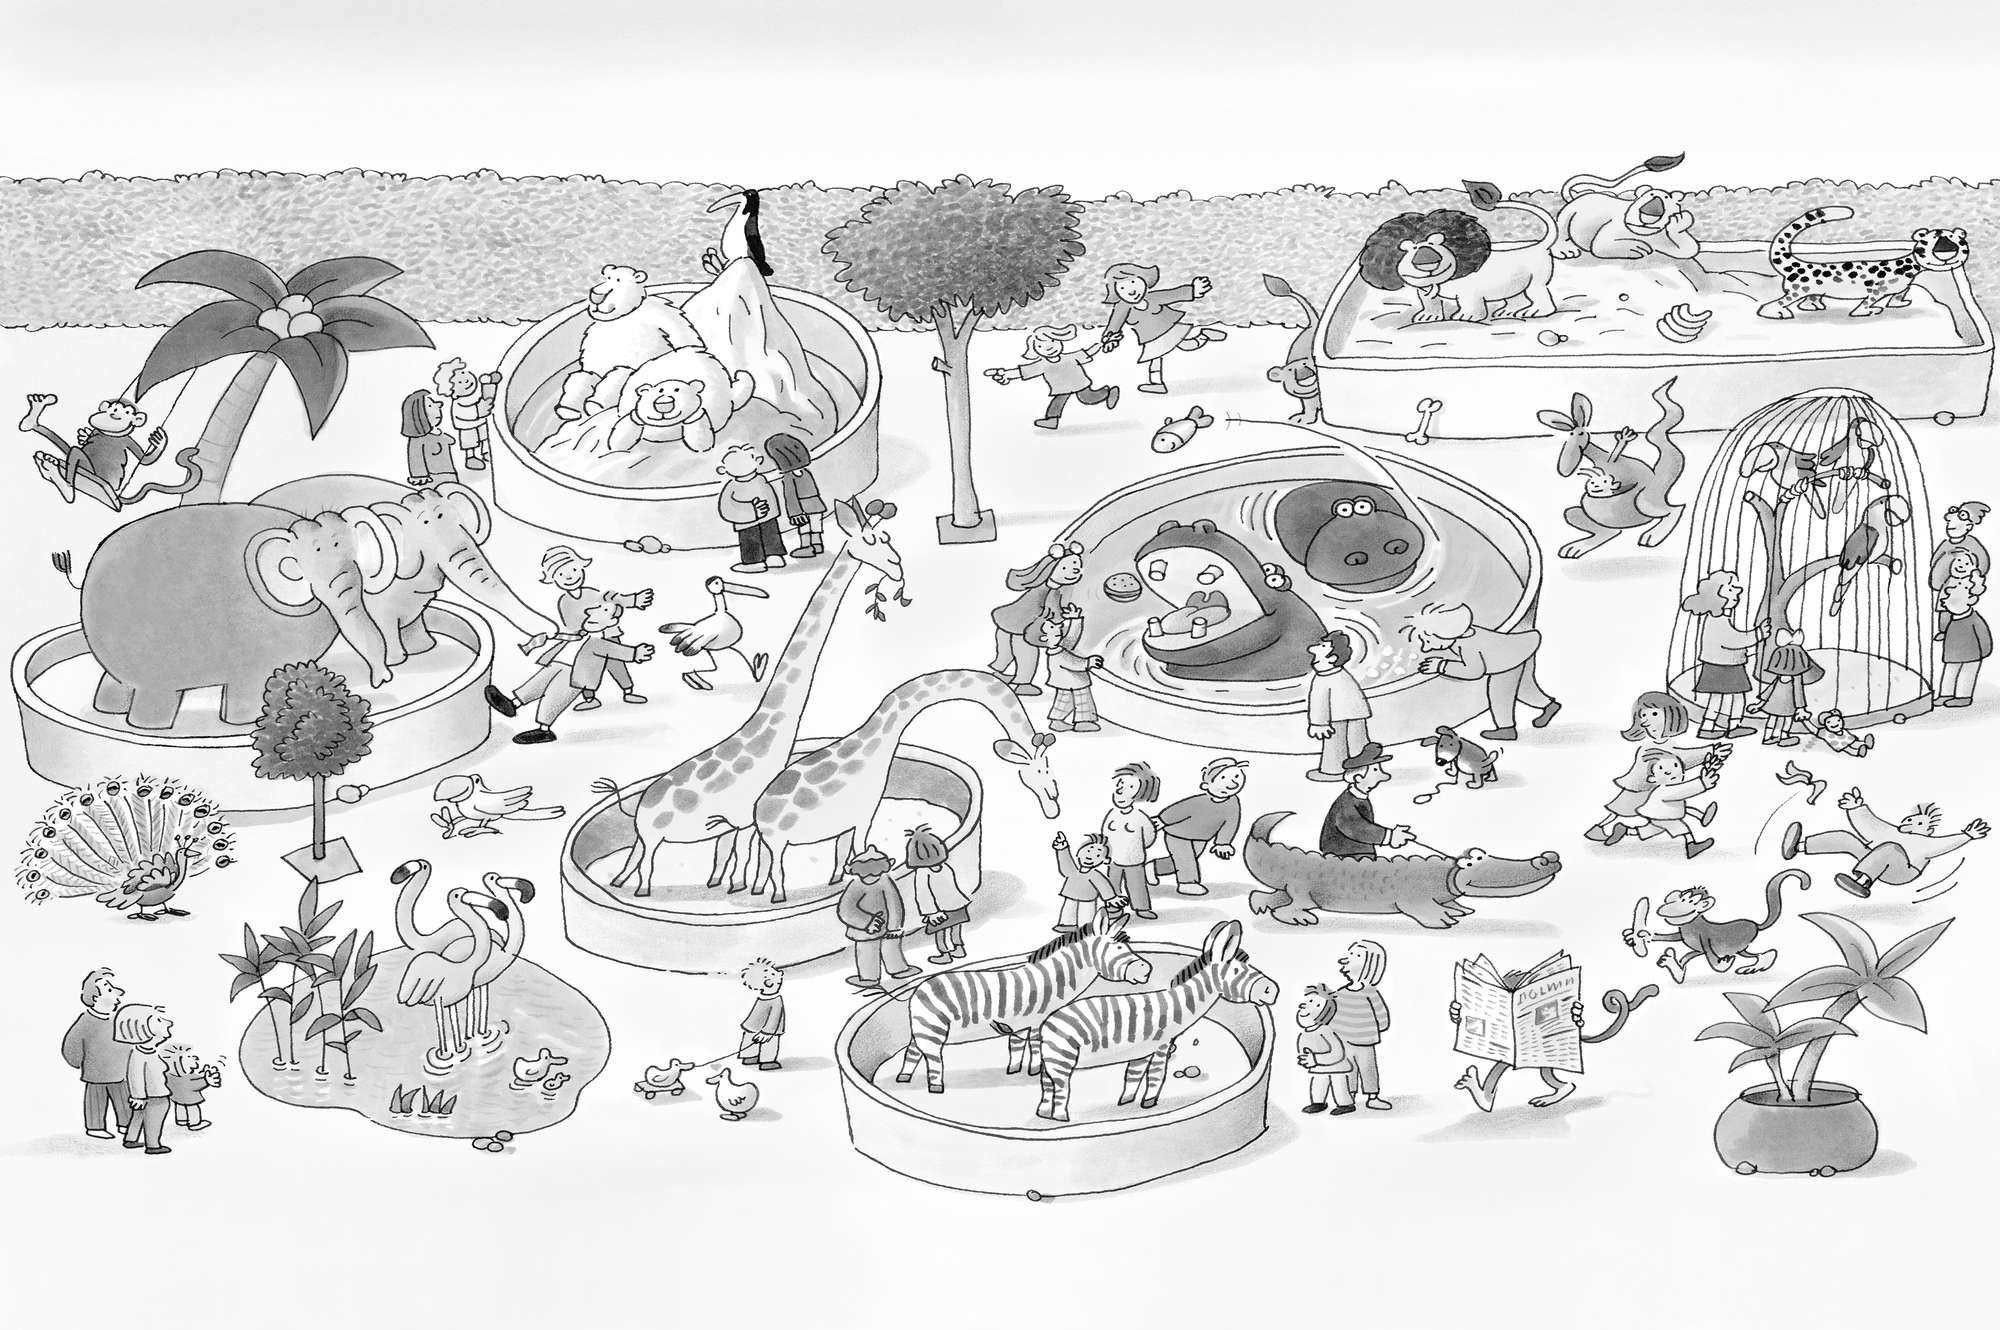             Kids mural zoo drawing in black white on matt smooth non-woven
        